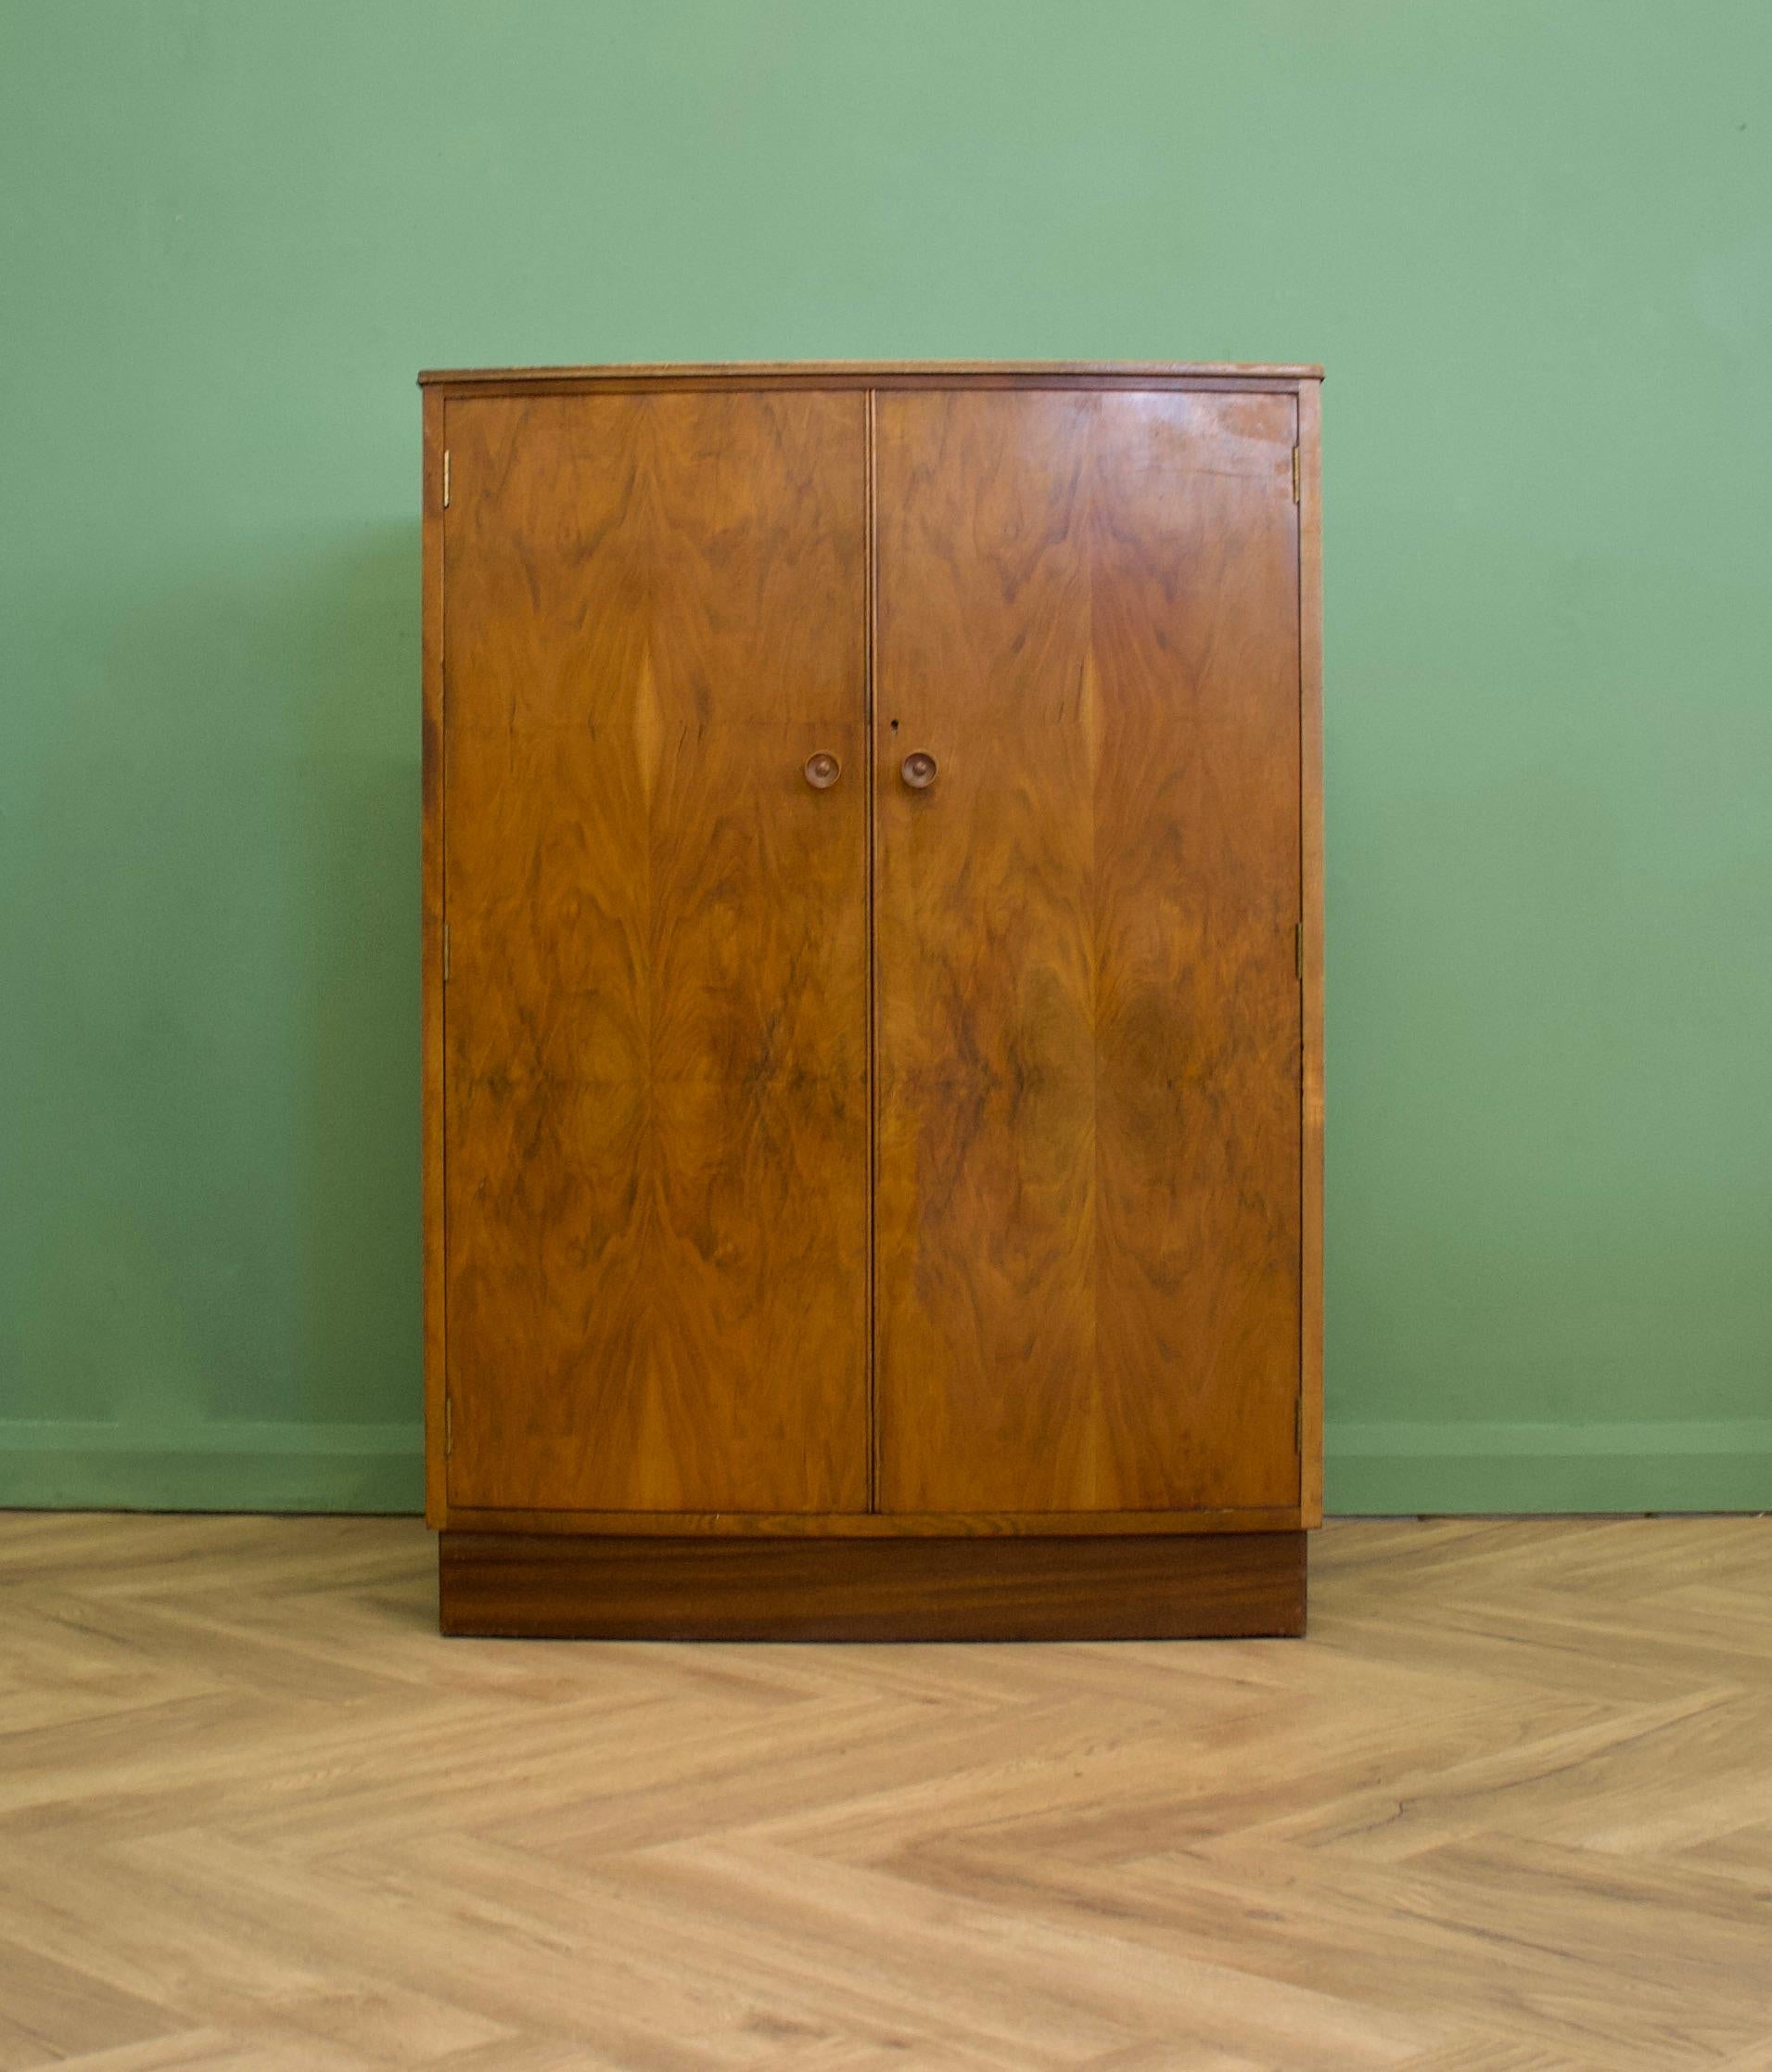 A vintage walnut Art Deco style compactum / compact wardrobe
Inside is fitted out with a pull out rail, three drawers and shelf
It also features solid wood handles.


 